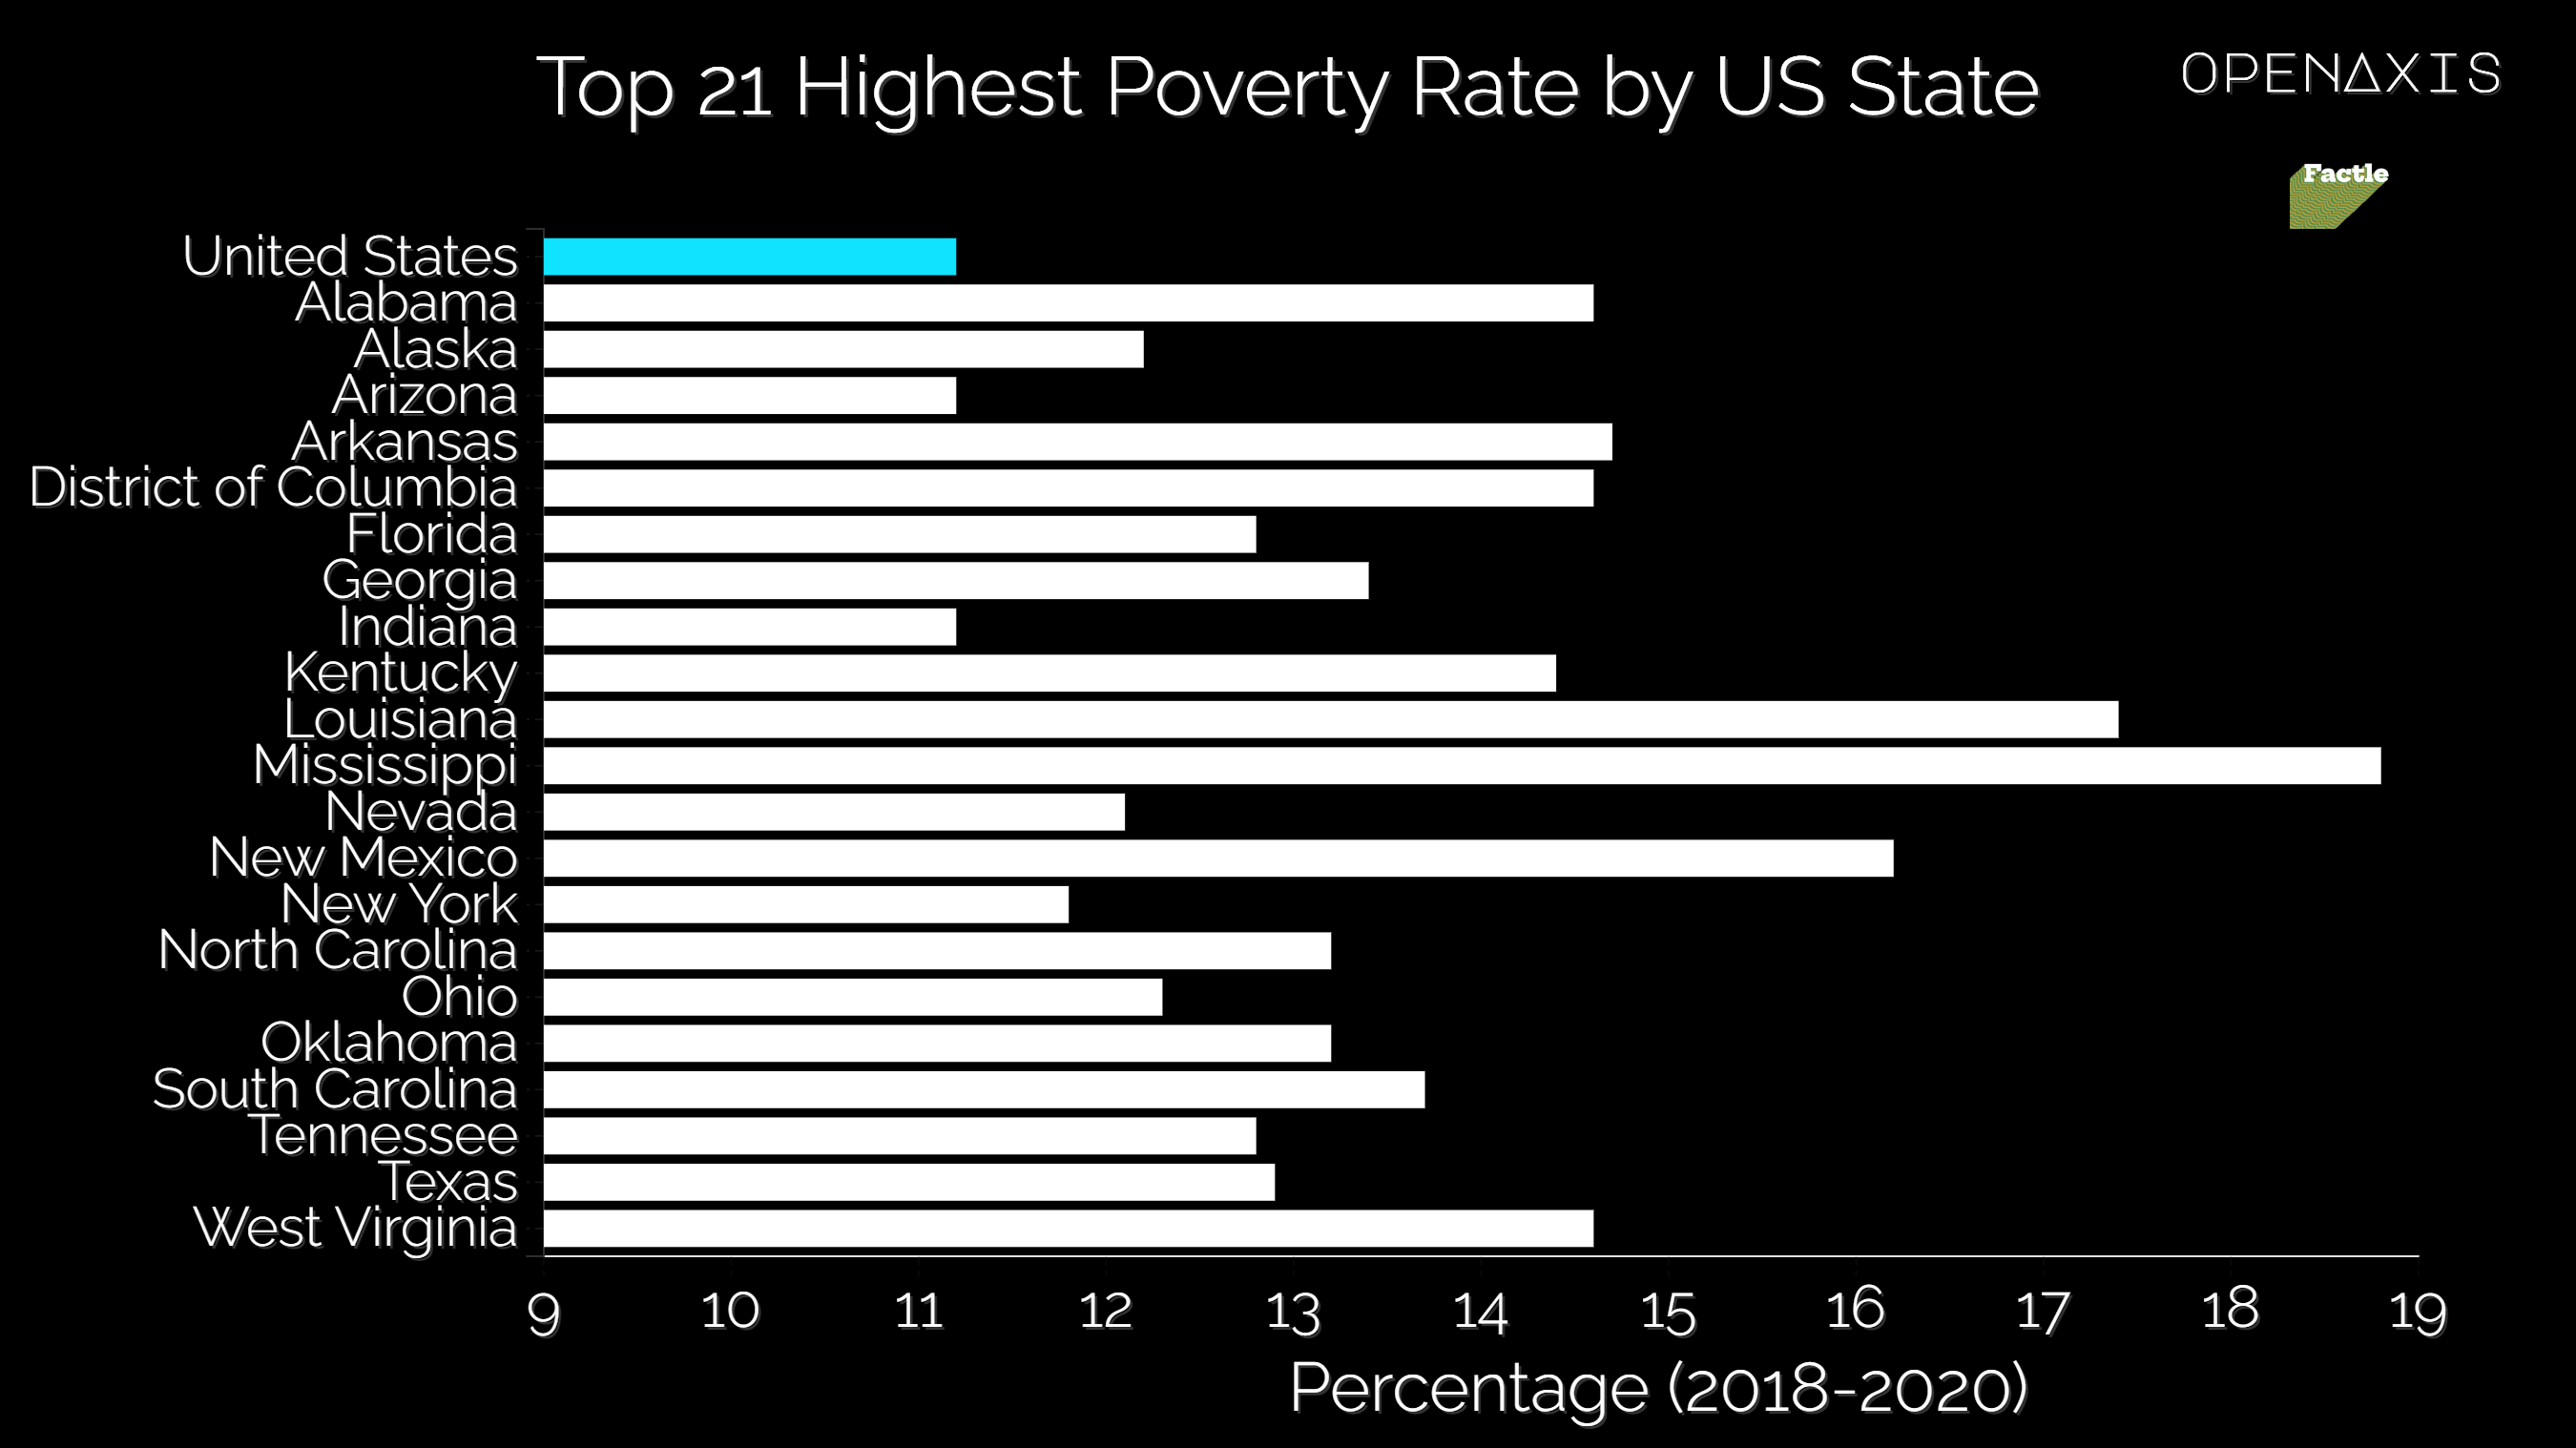 <p>Percentage of People in Poverty by State Using 3-Year Average: 2018-2020</p><p>View full 50 State dataset below or <a href="https://app.openaxis.com/data/3501" target="_blank">here</a></p><p>﻿<a href="/search?q=%23sotu" target="_blank">#sotu</a>﻿ ﻿<a href="/search?q=%23poverty" target="_blank">#poverty</a>﻿ ﻿<a href="/search?q=%23trivia" target="_blank">#trivia</a>﻿ ﻿<a href="/search?q=%23factle" target="_blank">#factle</a>﻿ ﻿<a href="/search?q=%23top5" target="_blank">#top5</a>﻿ </p><p>Source: US Census Bureau</p>